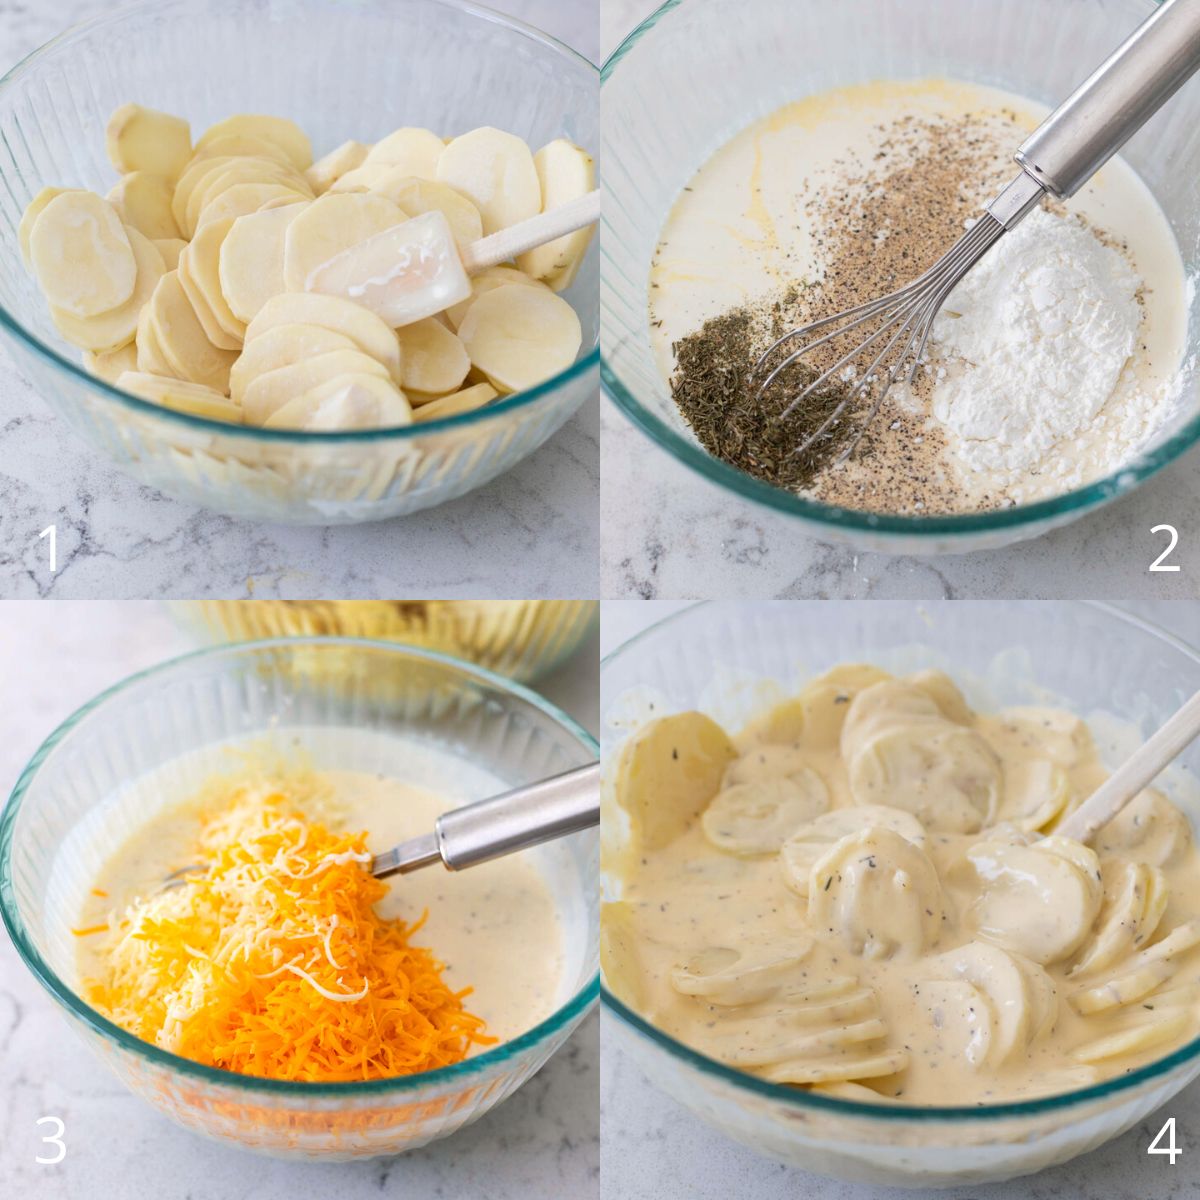 The step by step photos show how to slice the potatoes, whisk the cream sauce, add the shredded cheese, and then stir it all together.